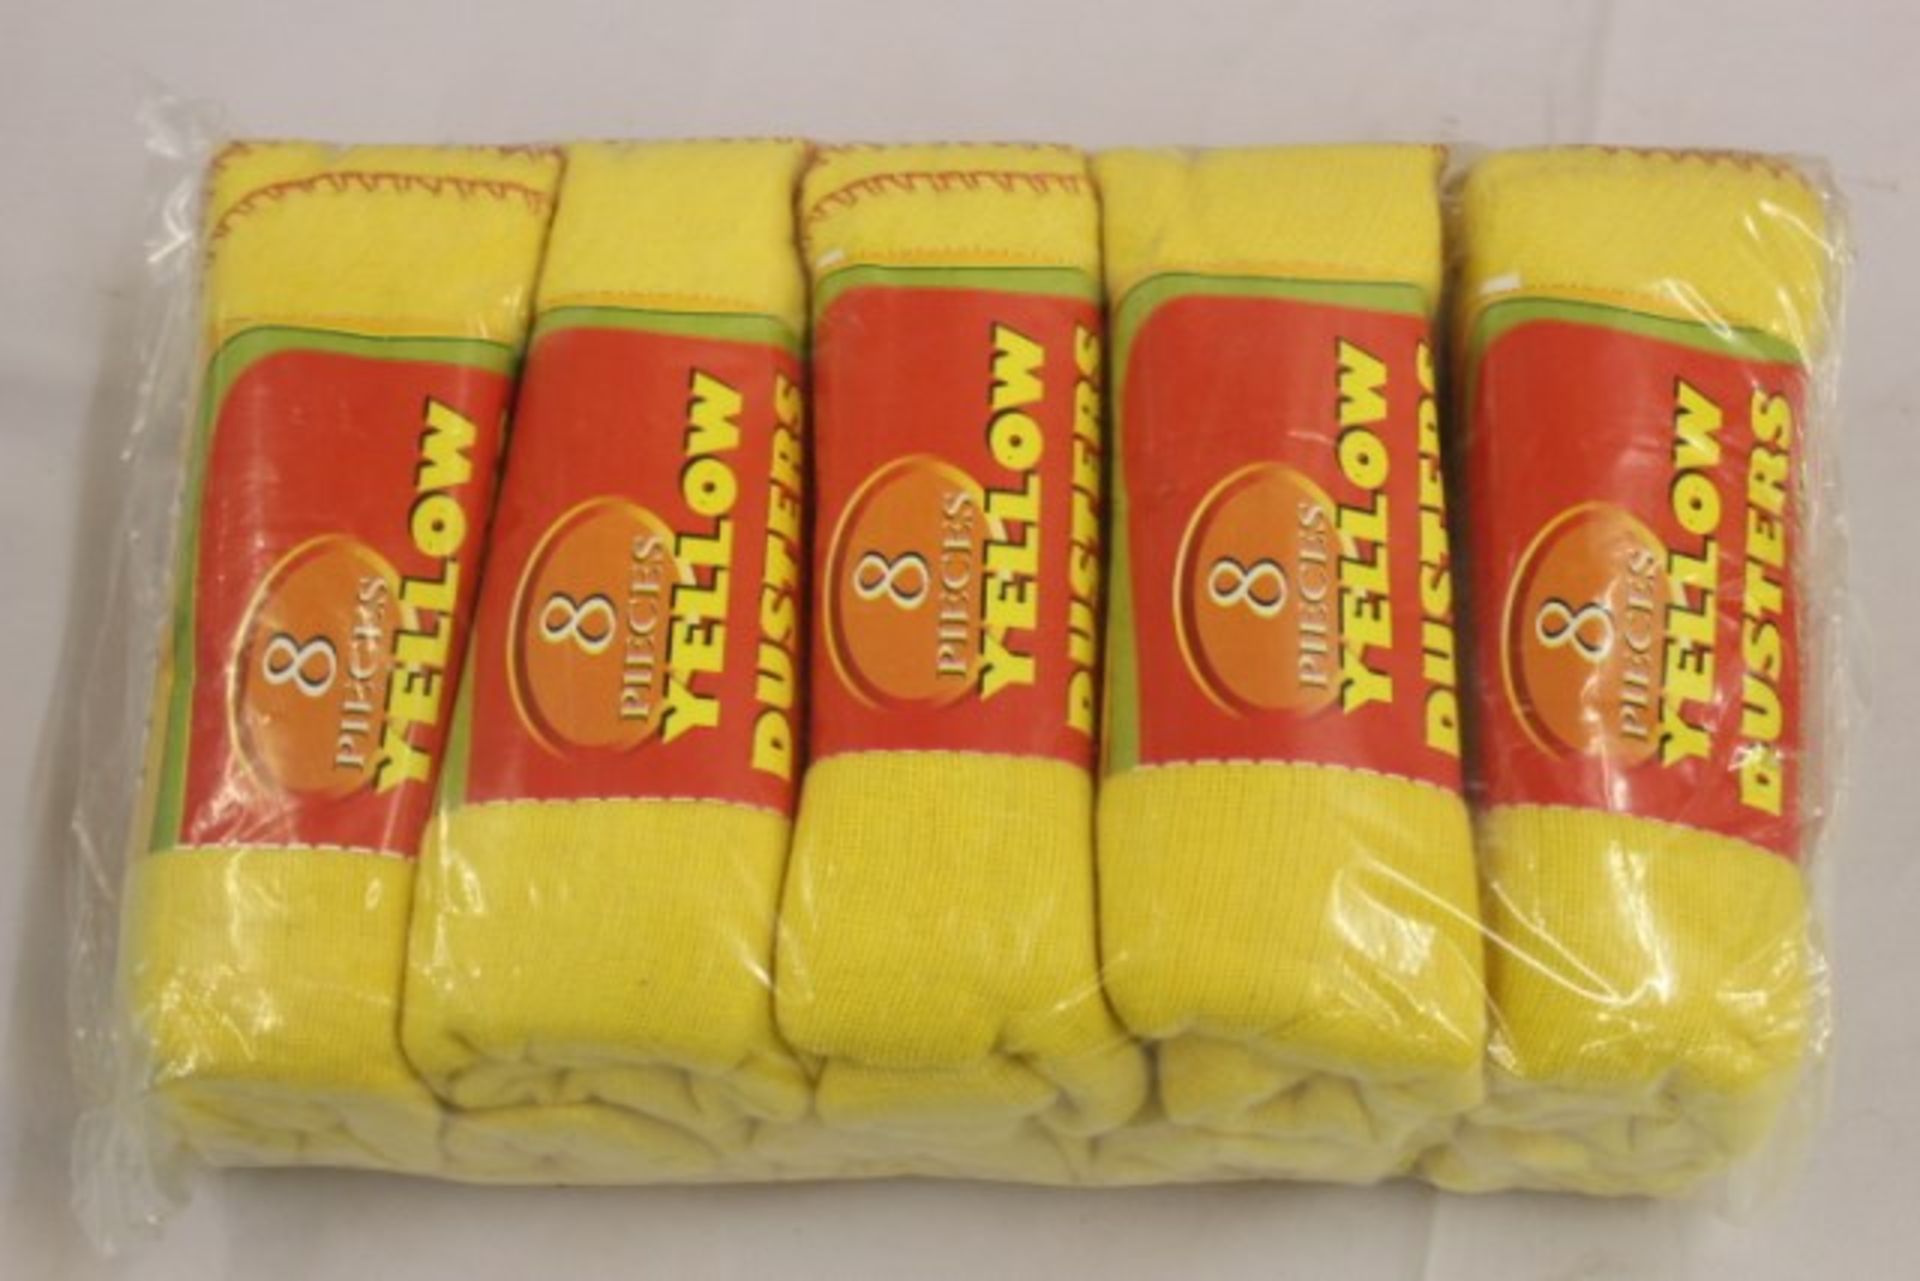 V *TRADE QTY* Brand New 80 Yellow Dusters In Packs Of 8 - 100% Cotton - Ideal For All cleaning Tasks